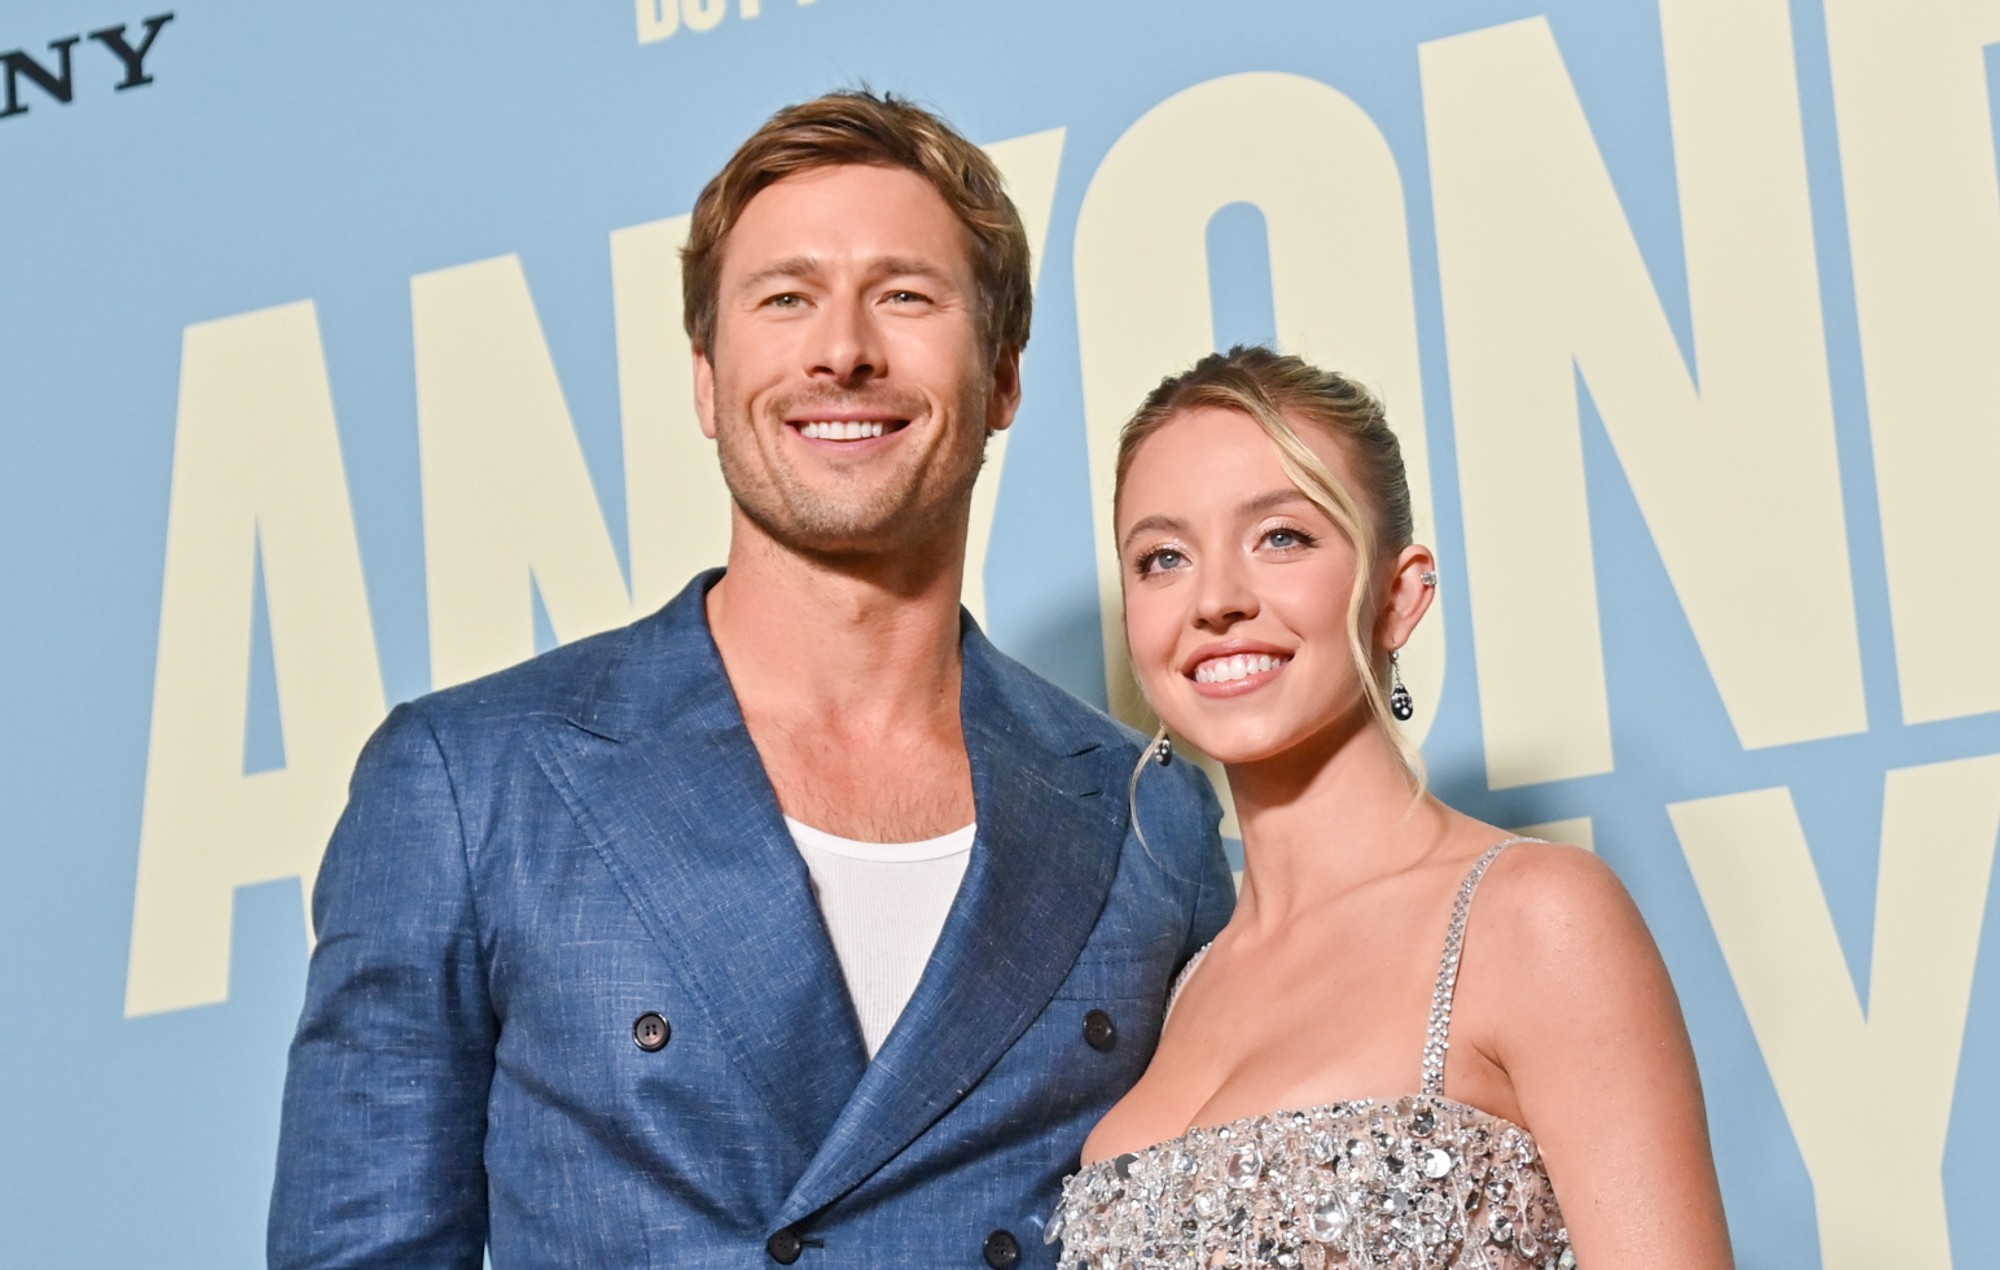 Glen Powell says he “almost died” filming nude scene with Sydney Sweeney